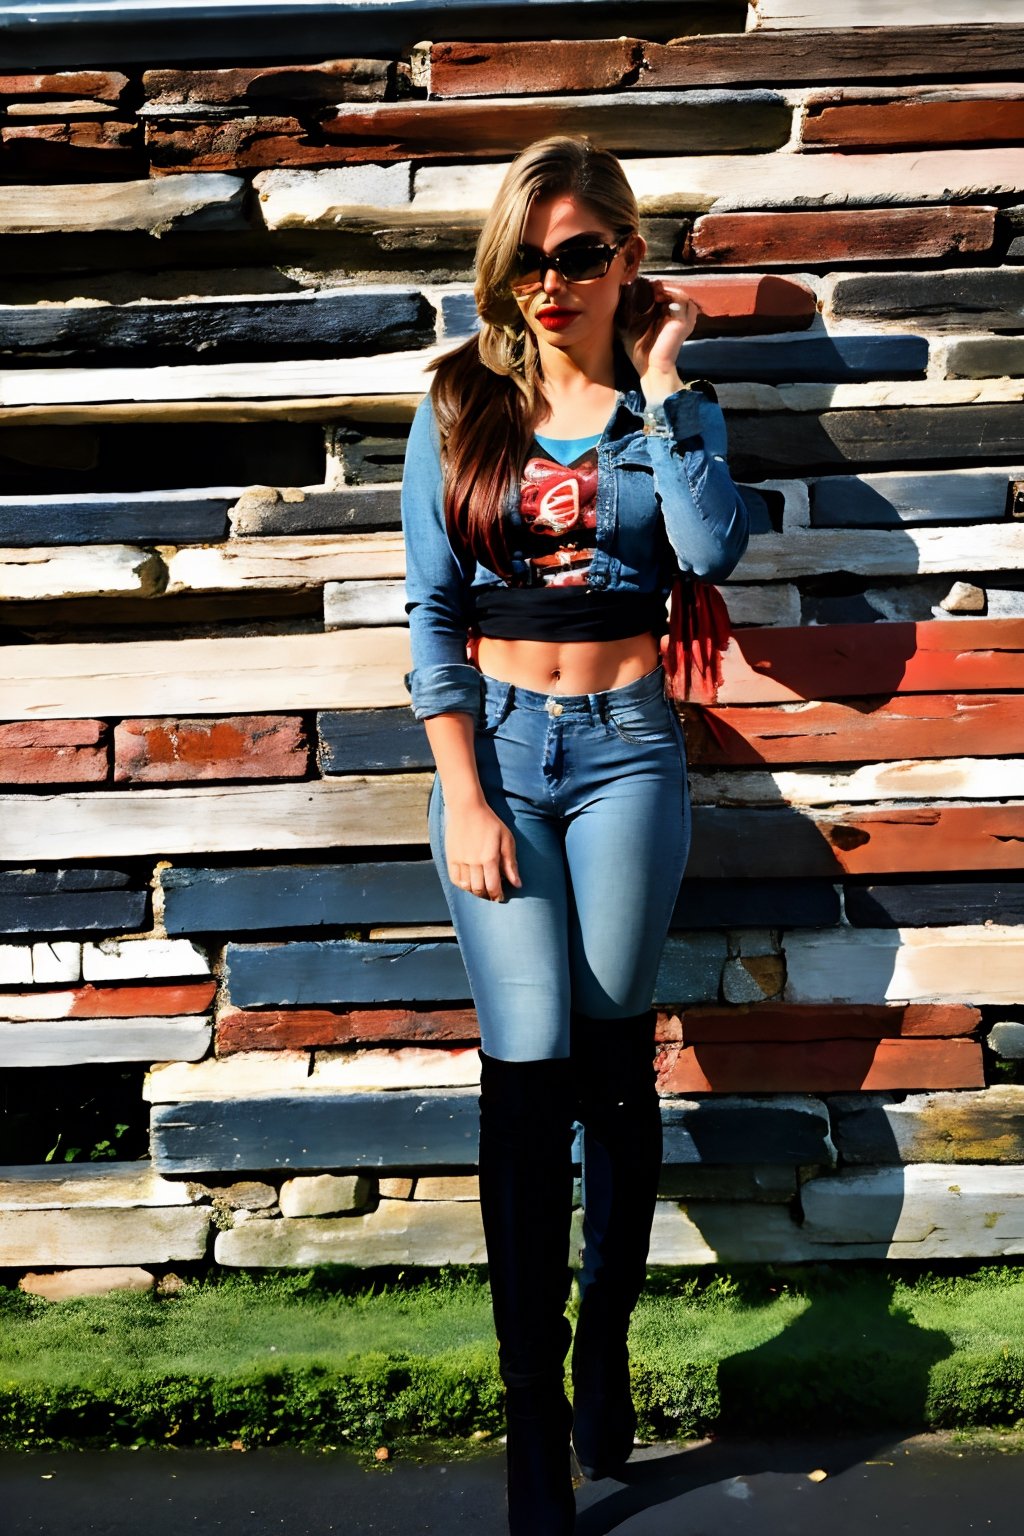 beautiful face, hot red lips, hot make-up, wearing cropped denim jacket and tight levis jeans in light blue color,blackbootsnjeans